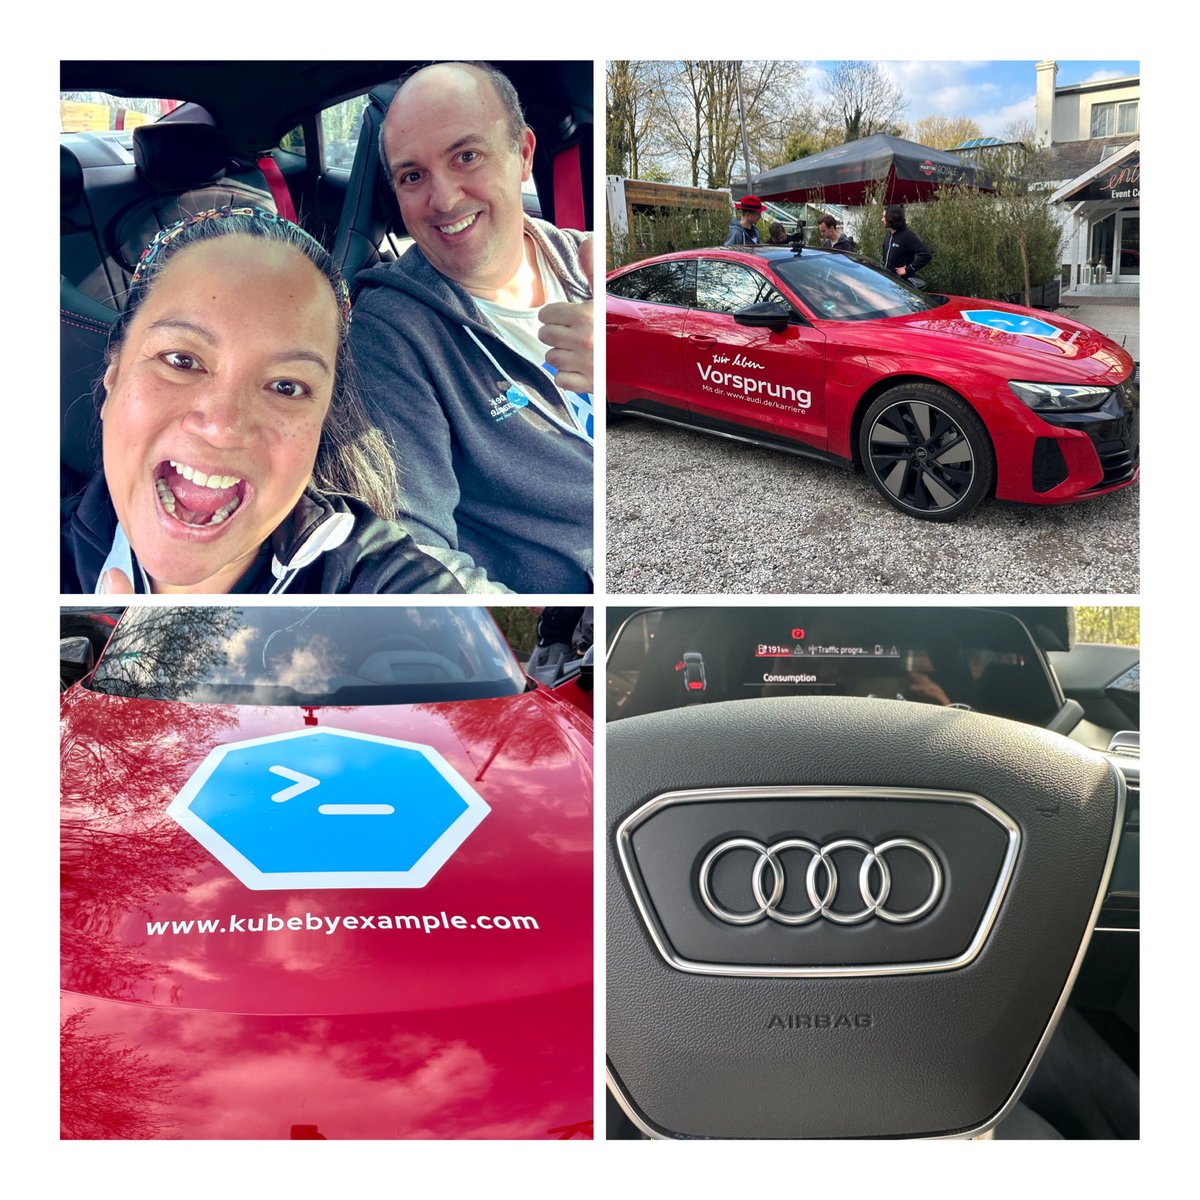 Checking out  the super cool @kubebyexample  branded RS e-tron @audi GT at the #KubeCon @openshiftcommon in #Amsterdam with @stu. Once again I got to be in the driver’s seat! #RedHat #audi #opensource